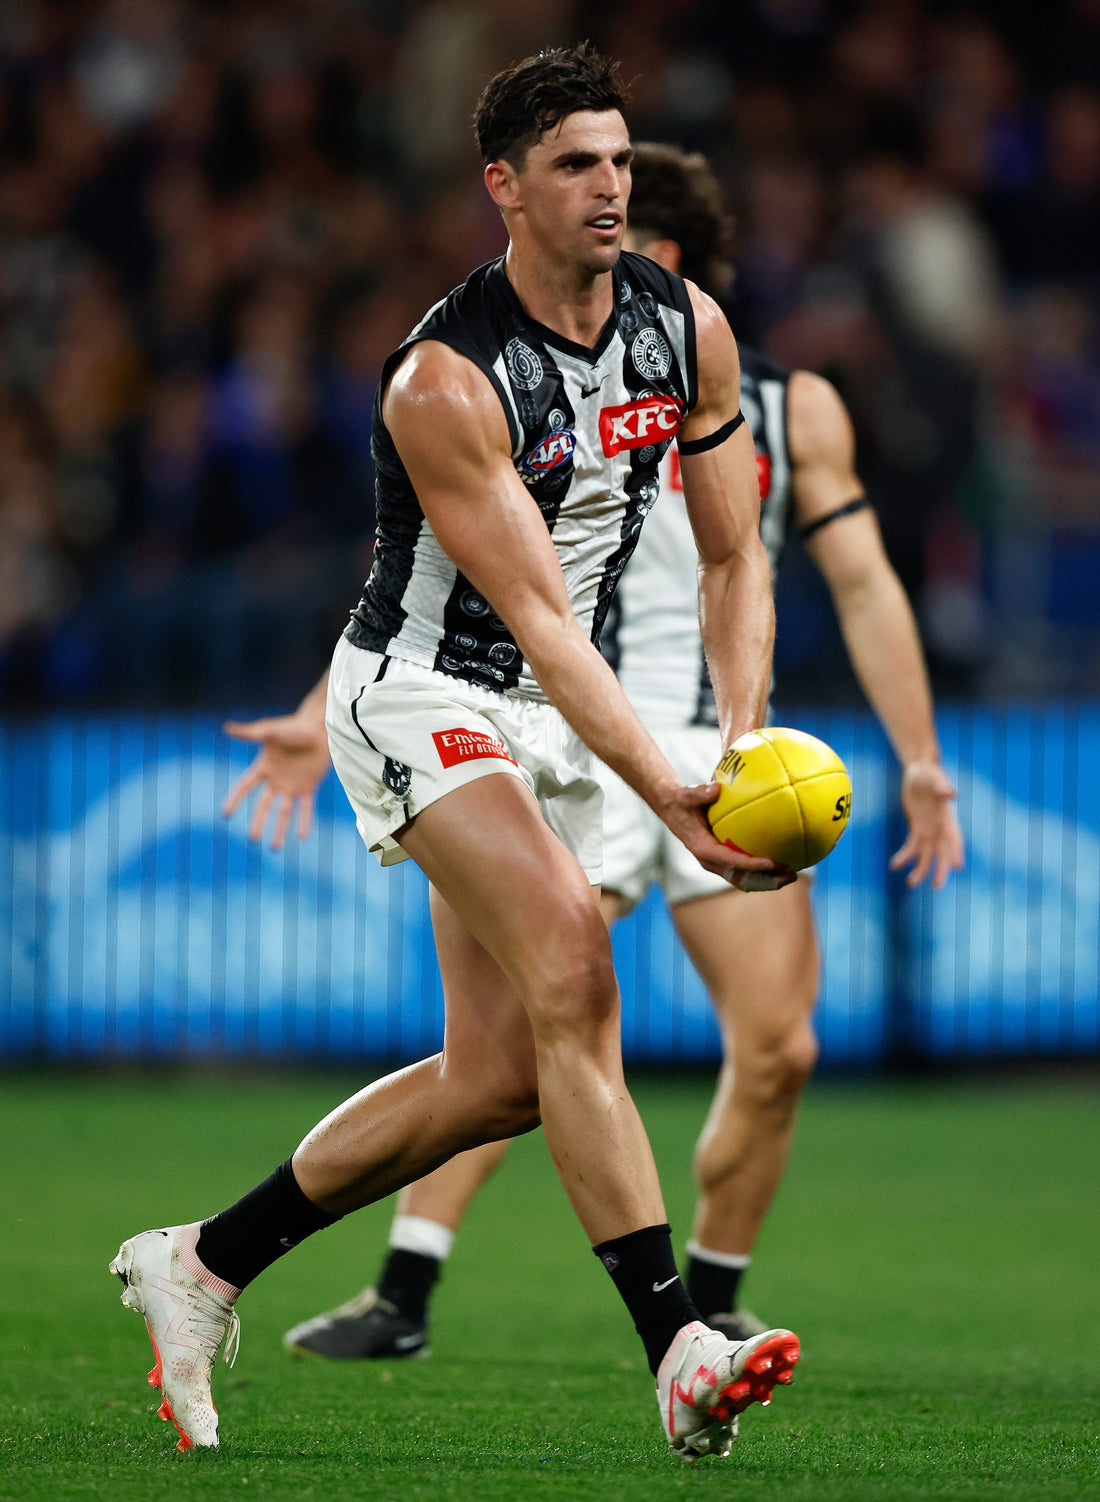 Most disposals in VFL/AFL history